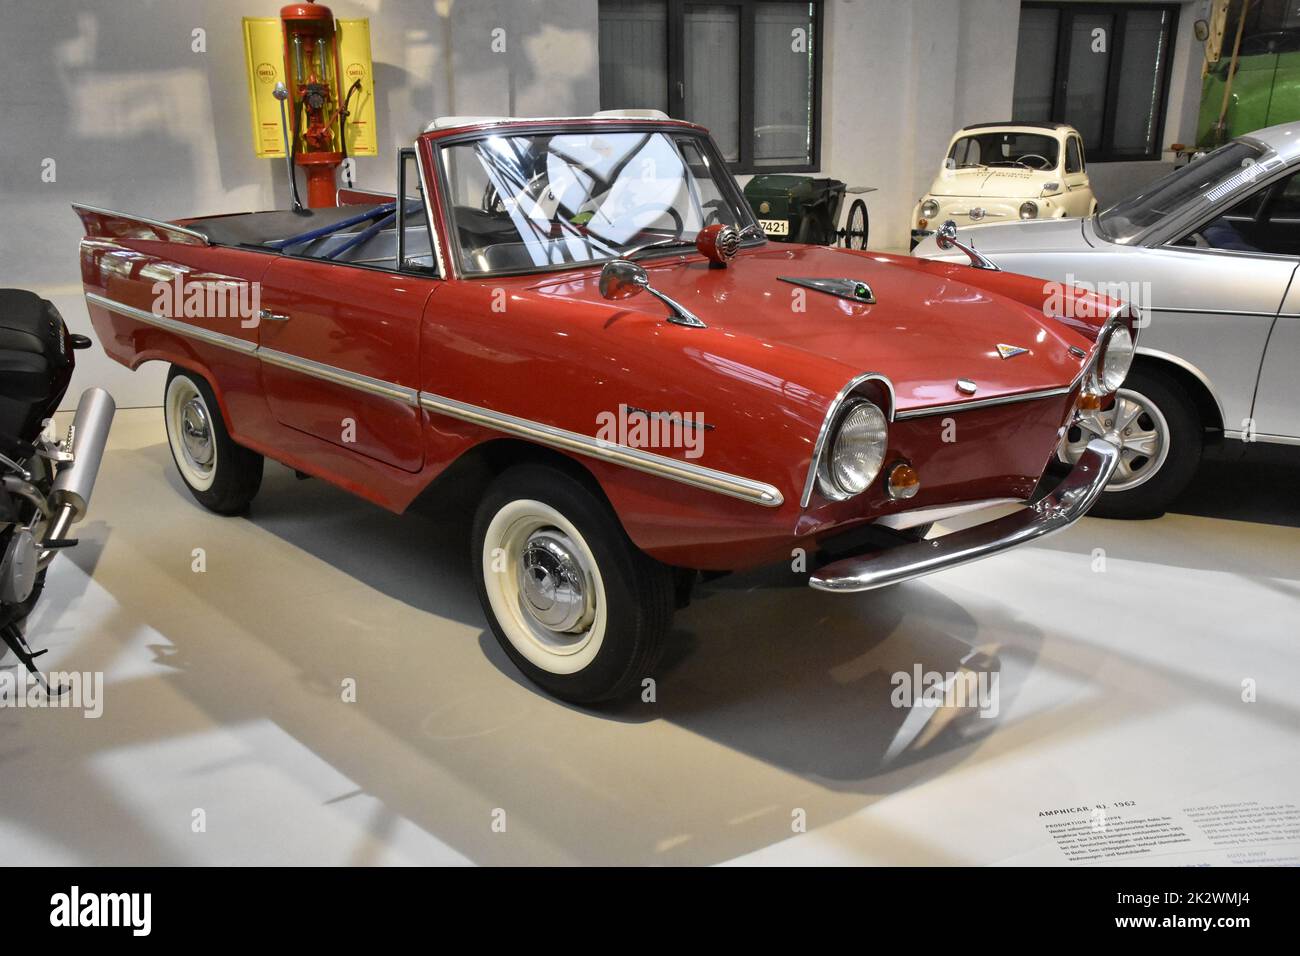 Amphicar 770 '1962 - Amphibious car of Germany - Phoito taken at technical museum Berlin 2018 Stock Photo